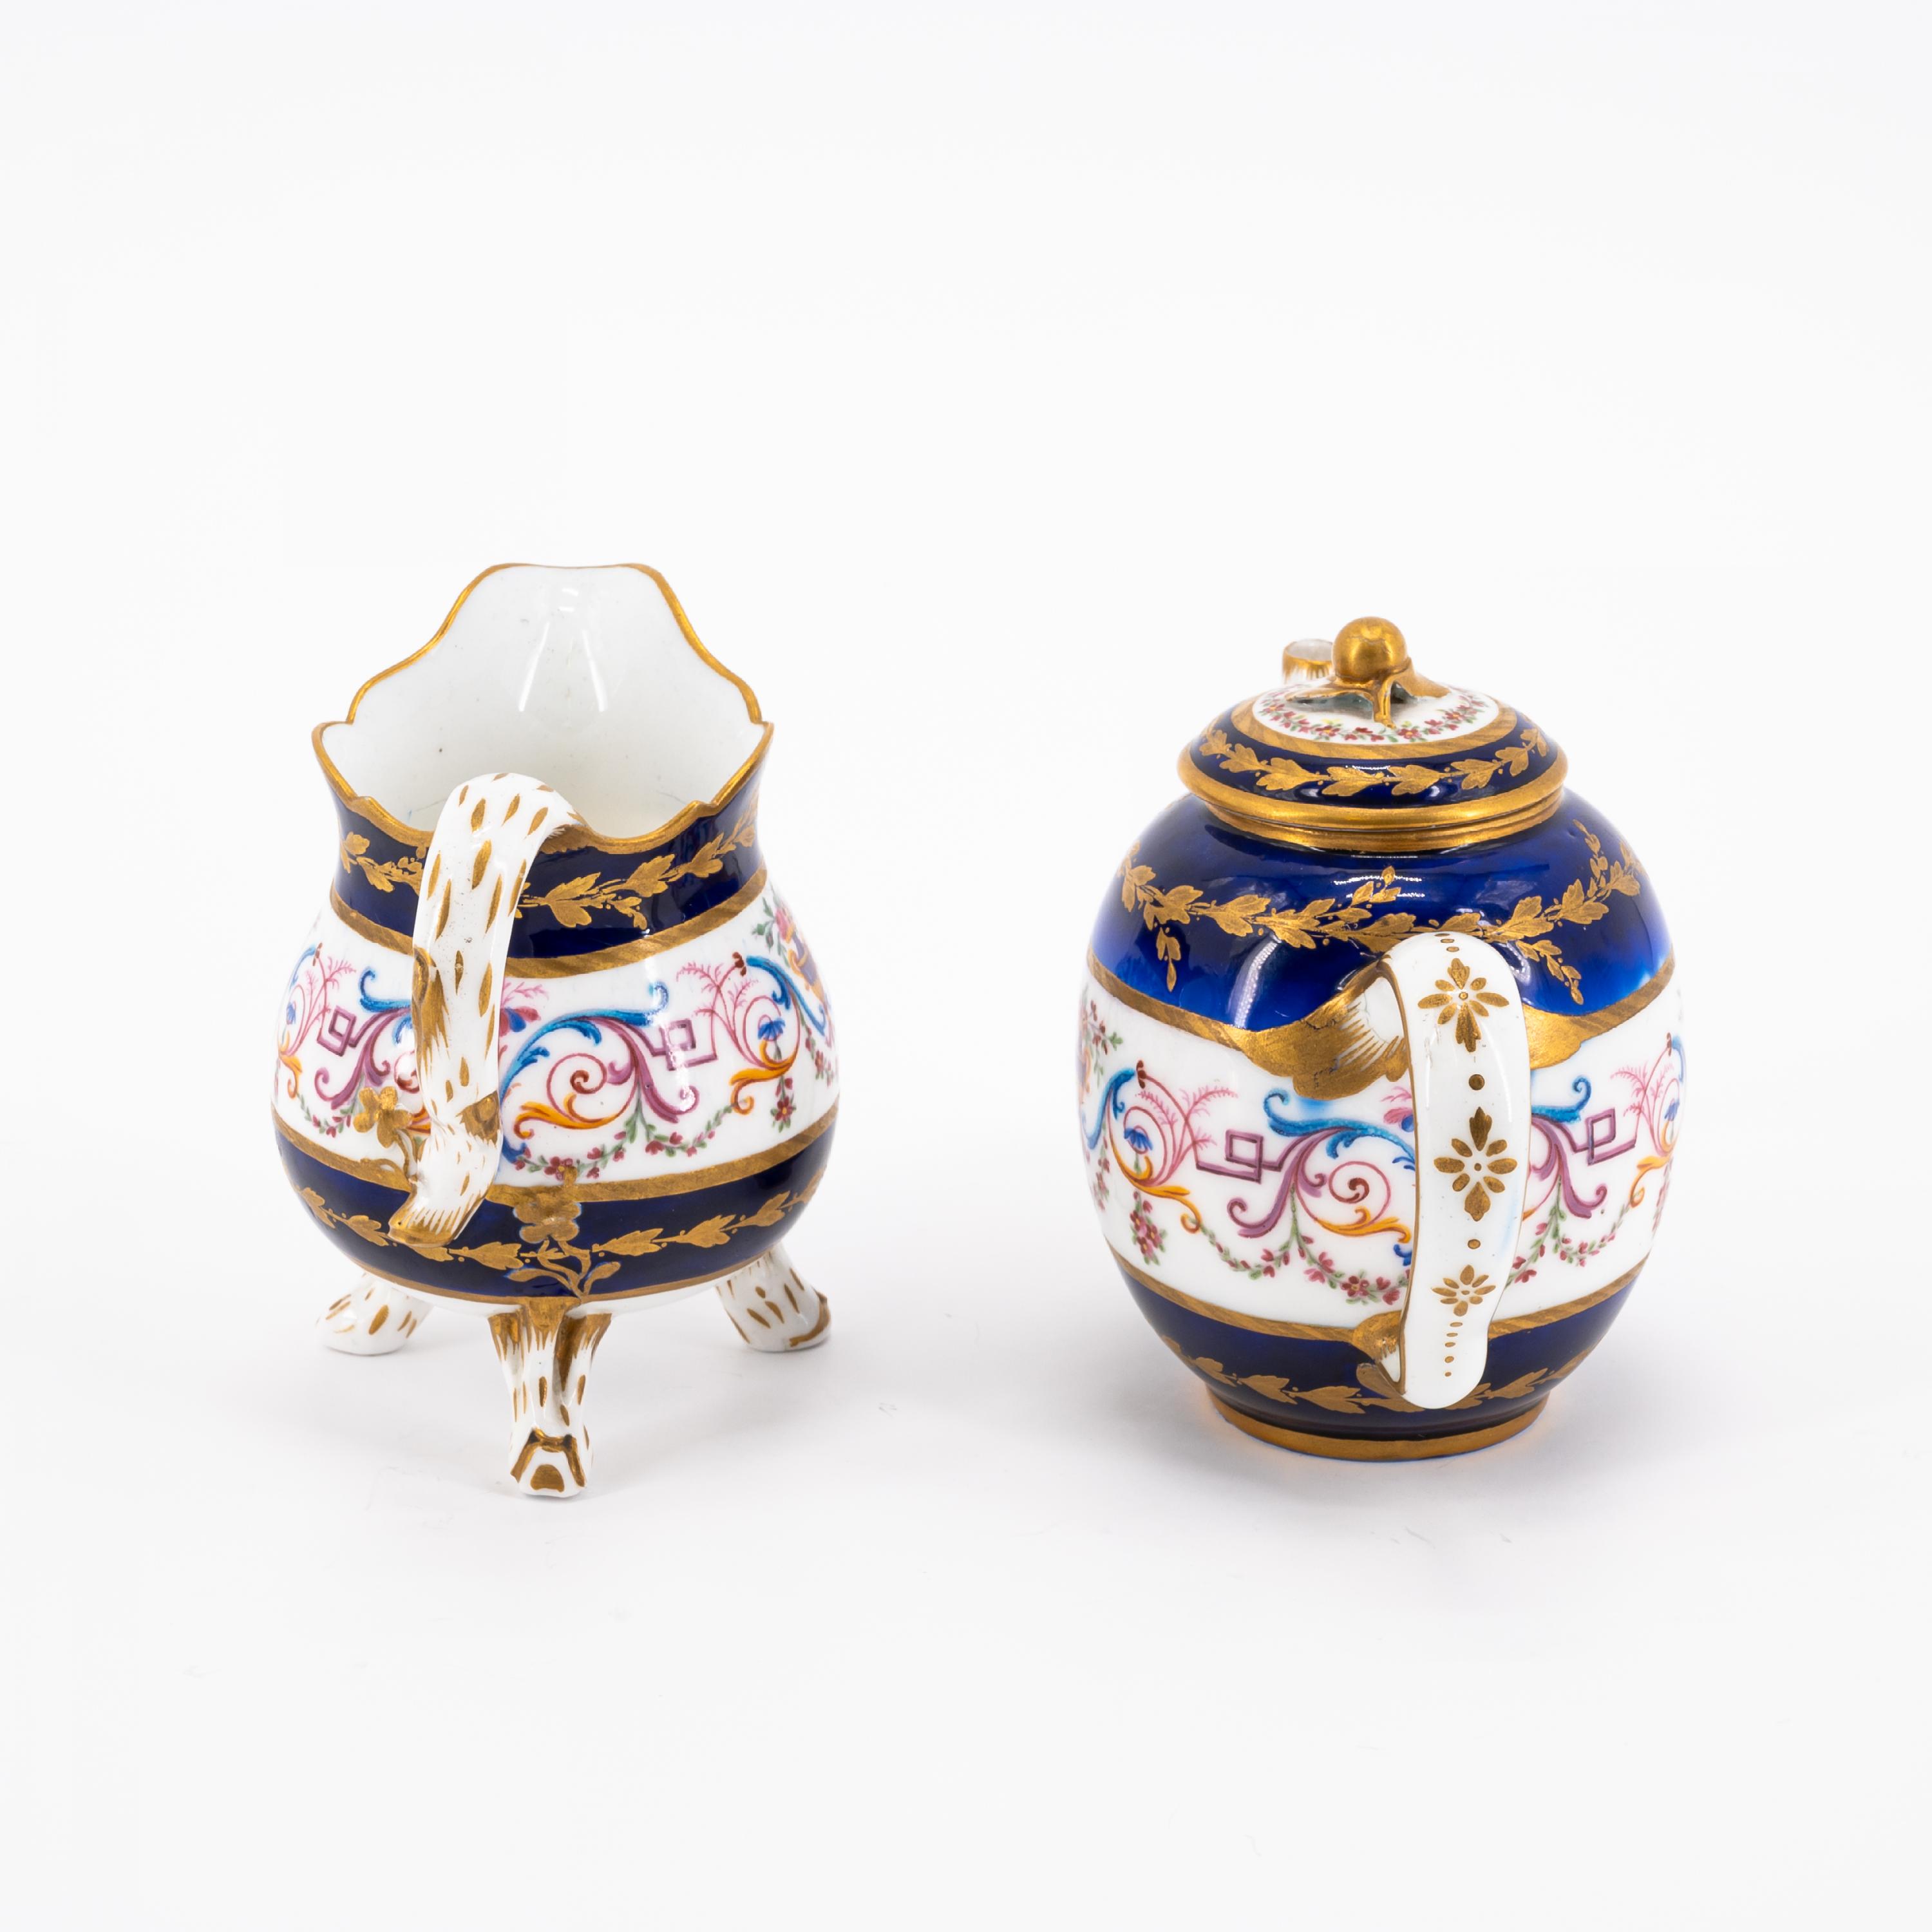 PORCELAIN SOLITAIRE WITH TENDRIL DECORATIONS AND DEEP BLUE GROUND - Image 10 of 13